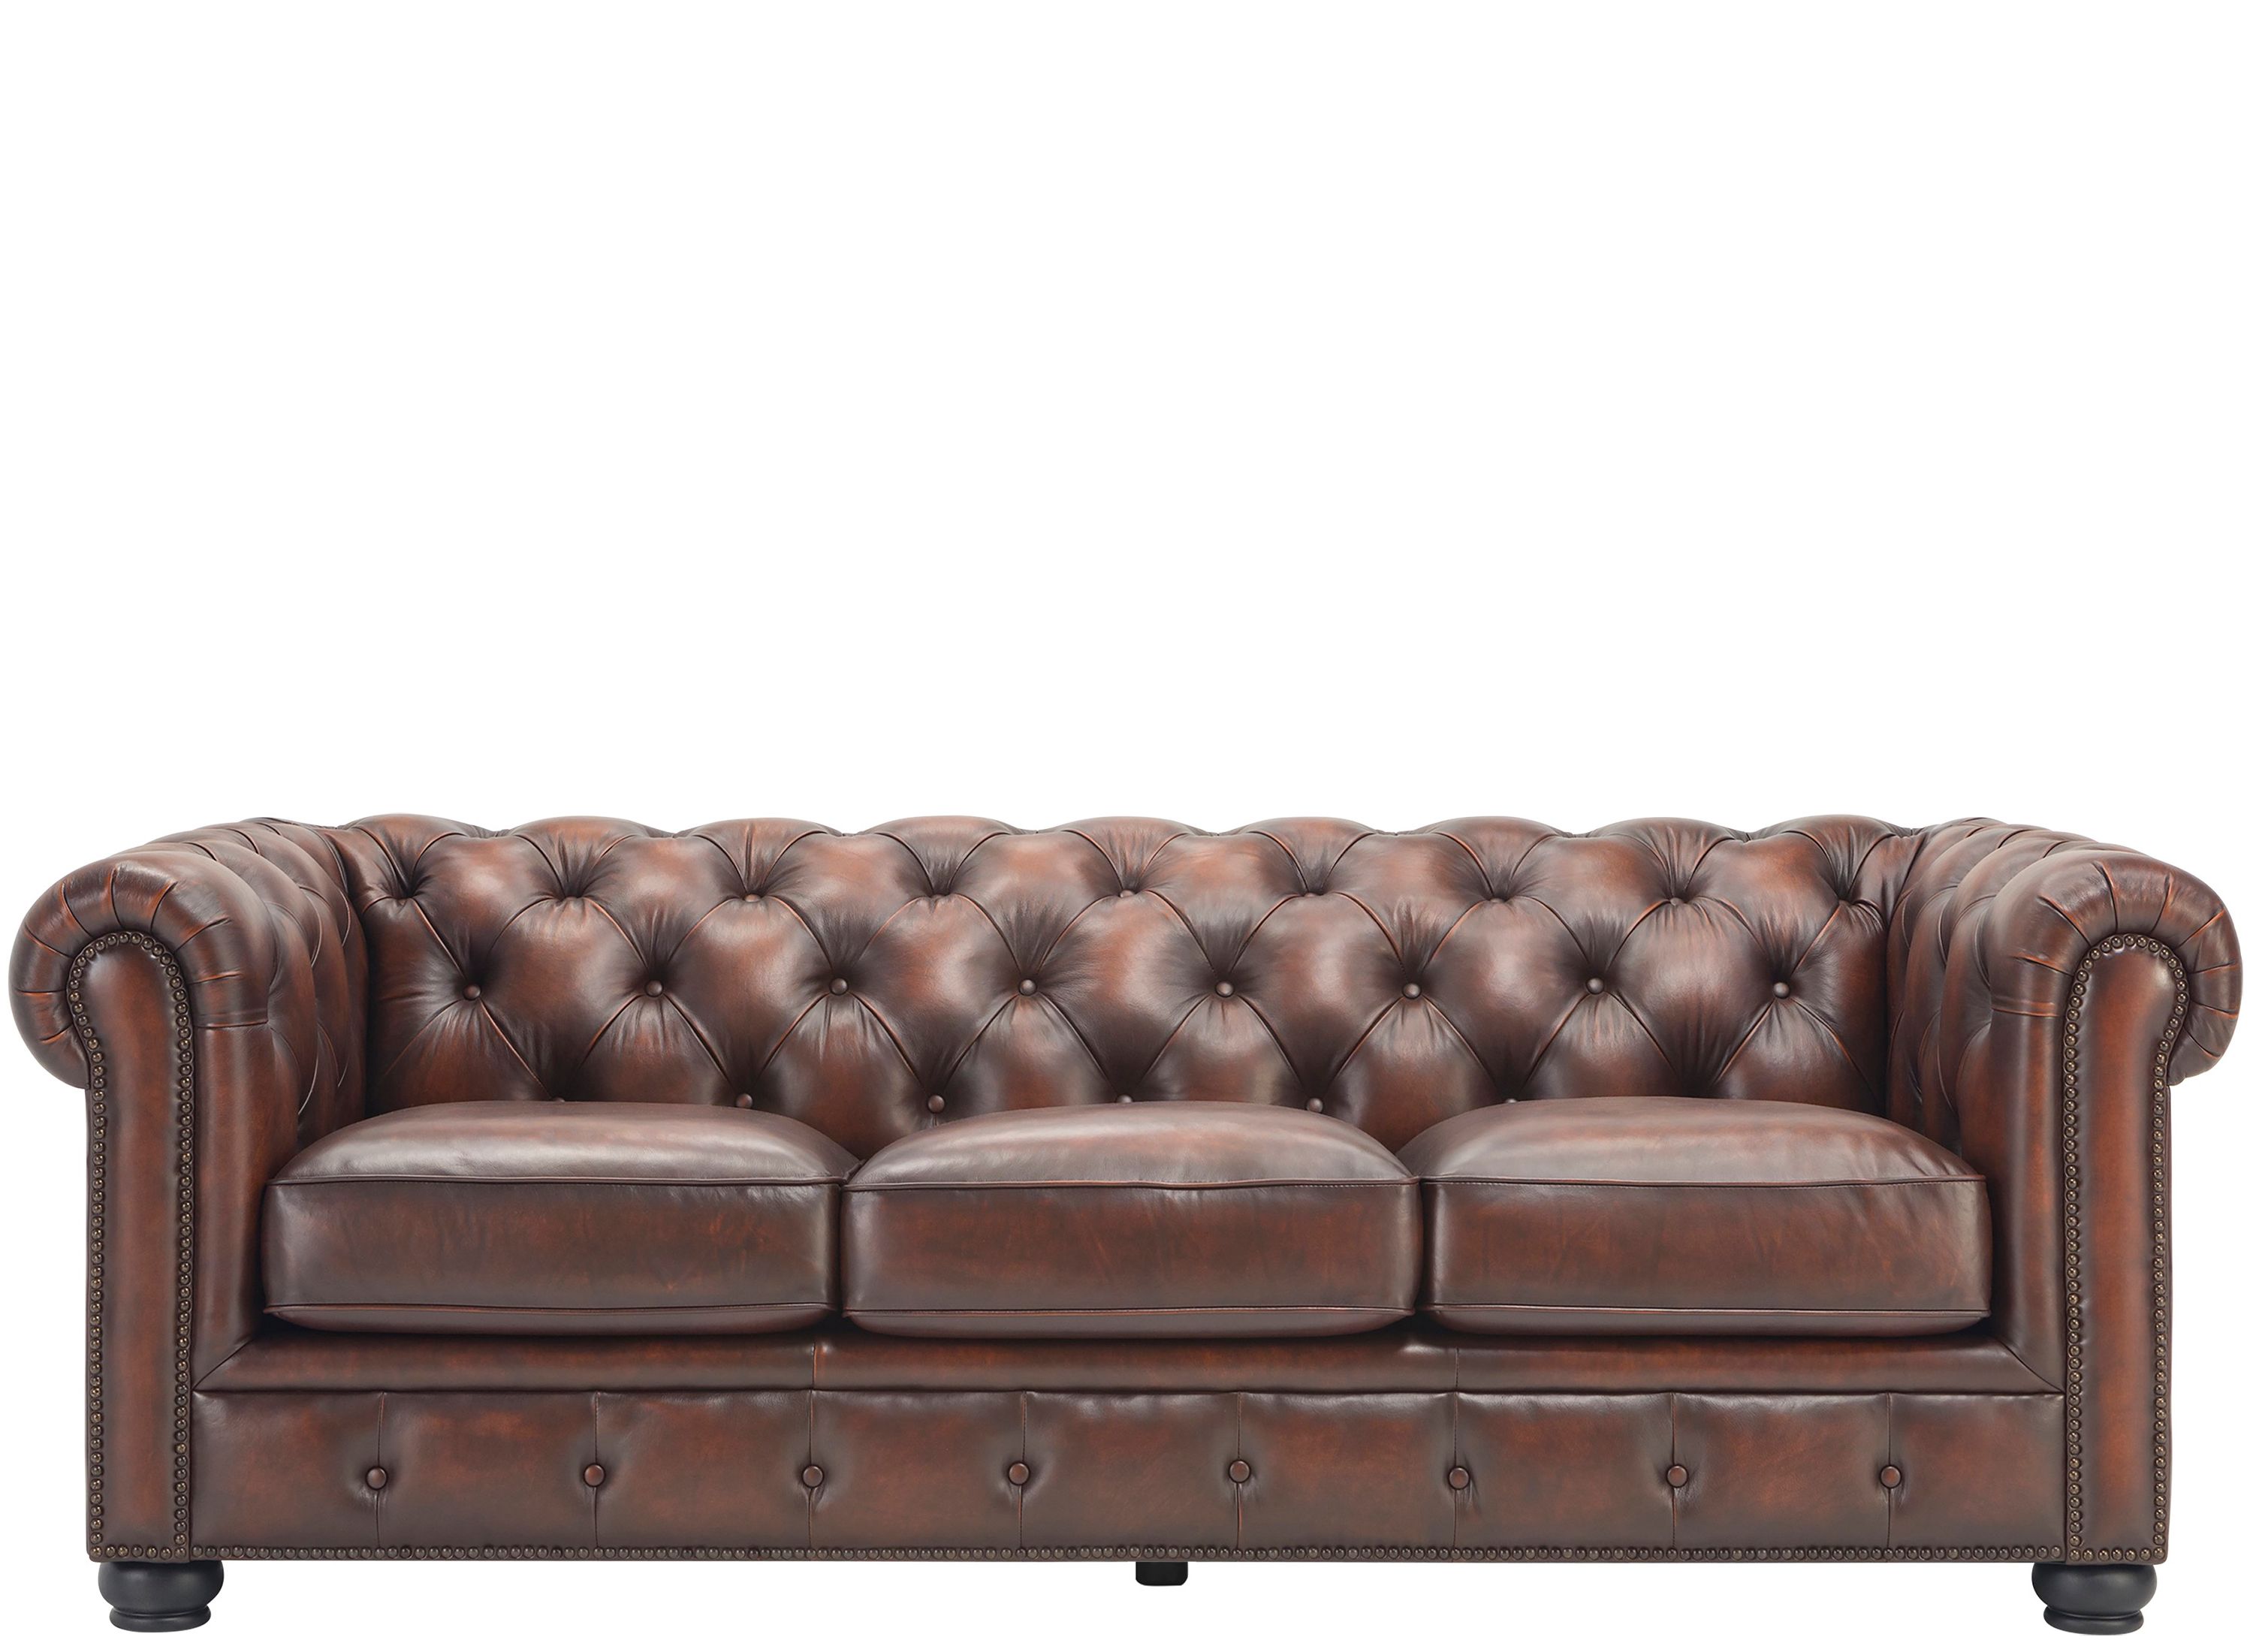 mainland dune 100 leather sofa review